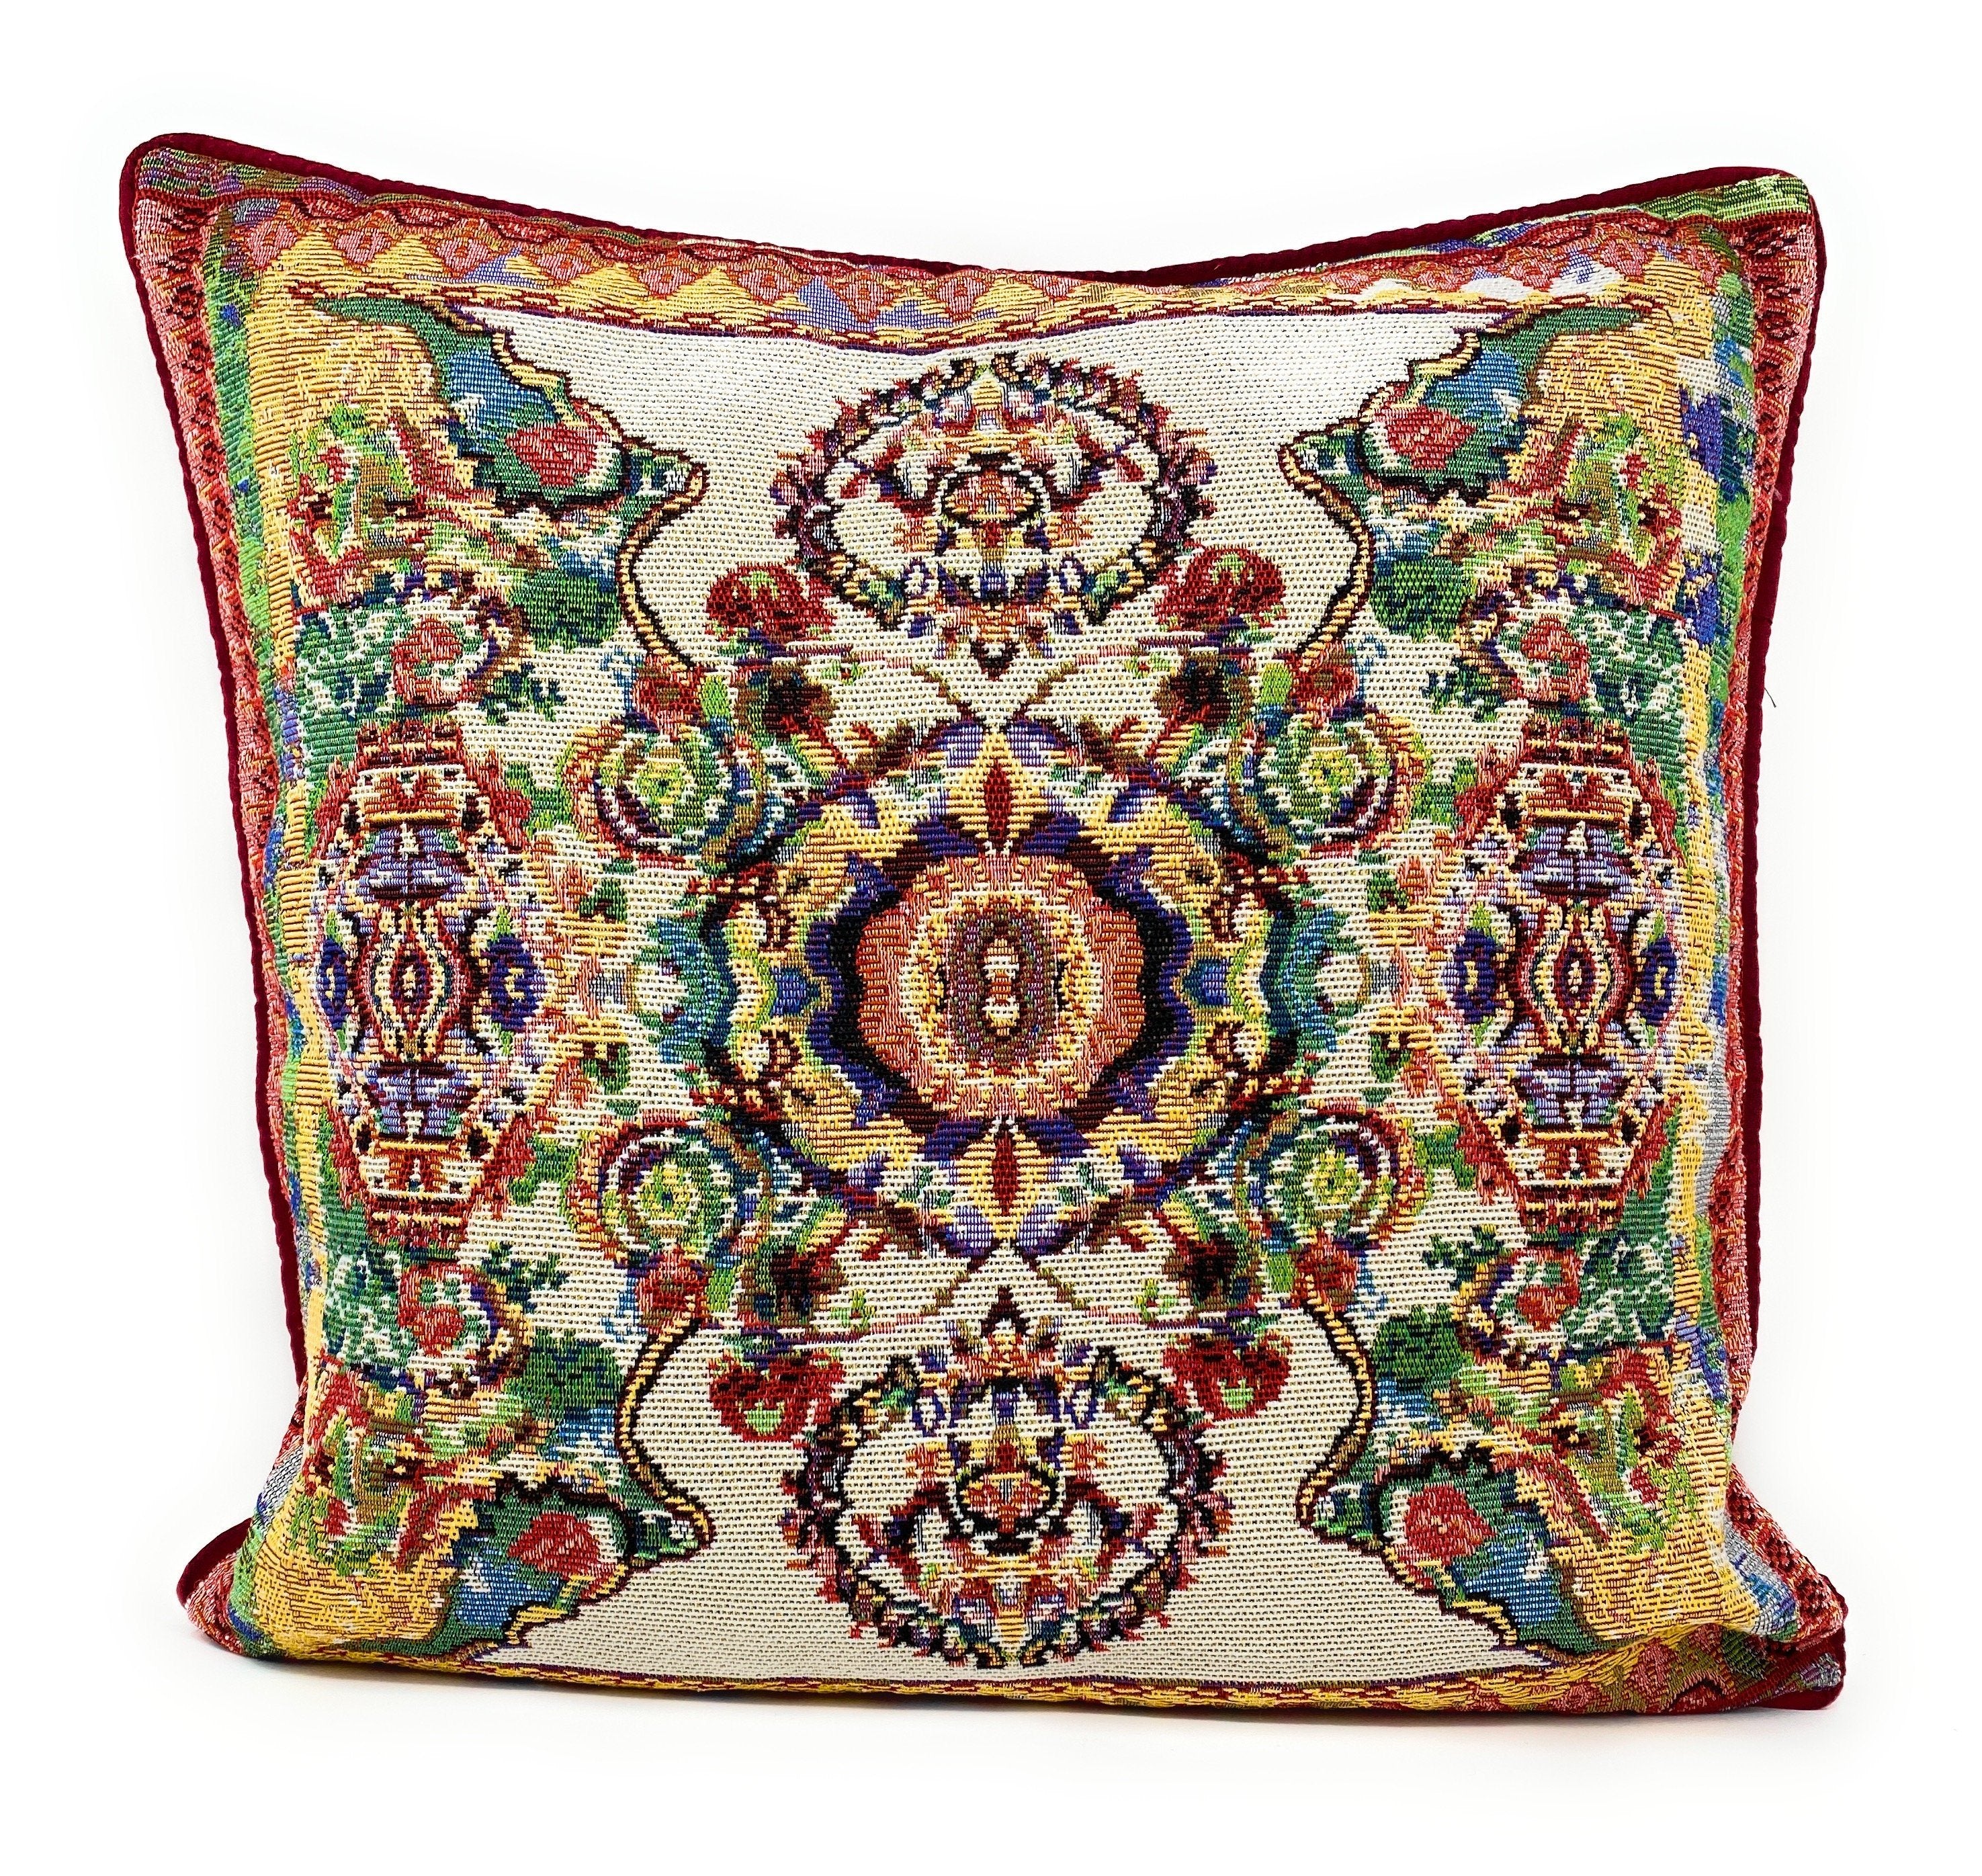 Tache Elegant Ivory Colorful Ornate Paisley Woven Tapestry Throw Pillow Cover (18193) - Tache Home Fashion